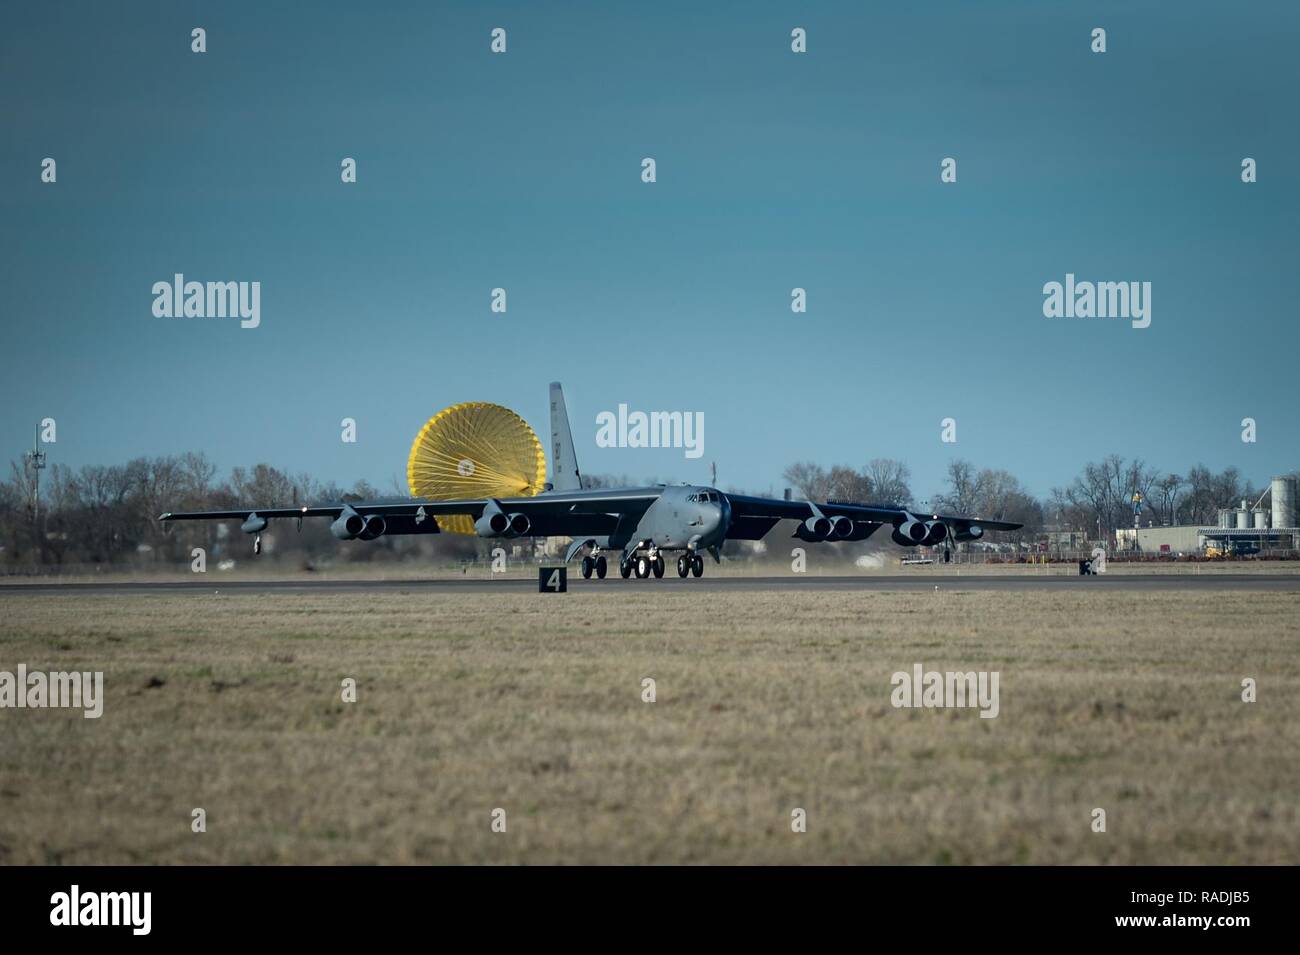 A B-52 Stratofortress deploys a drag chute during landing at Barksdale Air Force Base, La., Jan. 24, 2017. The drag parachute is used to decelerate the B-52 Stratofortress during landing, reducing wear and tear to ceramic pads used by the aircraft, increasing its life span. Stock Photo